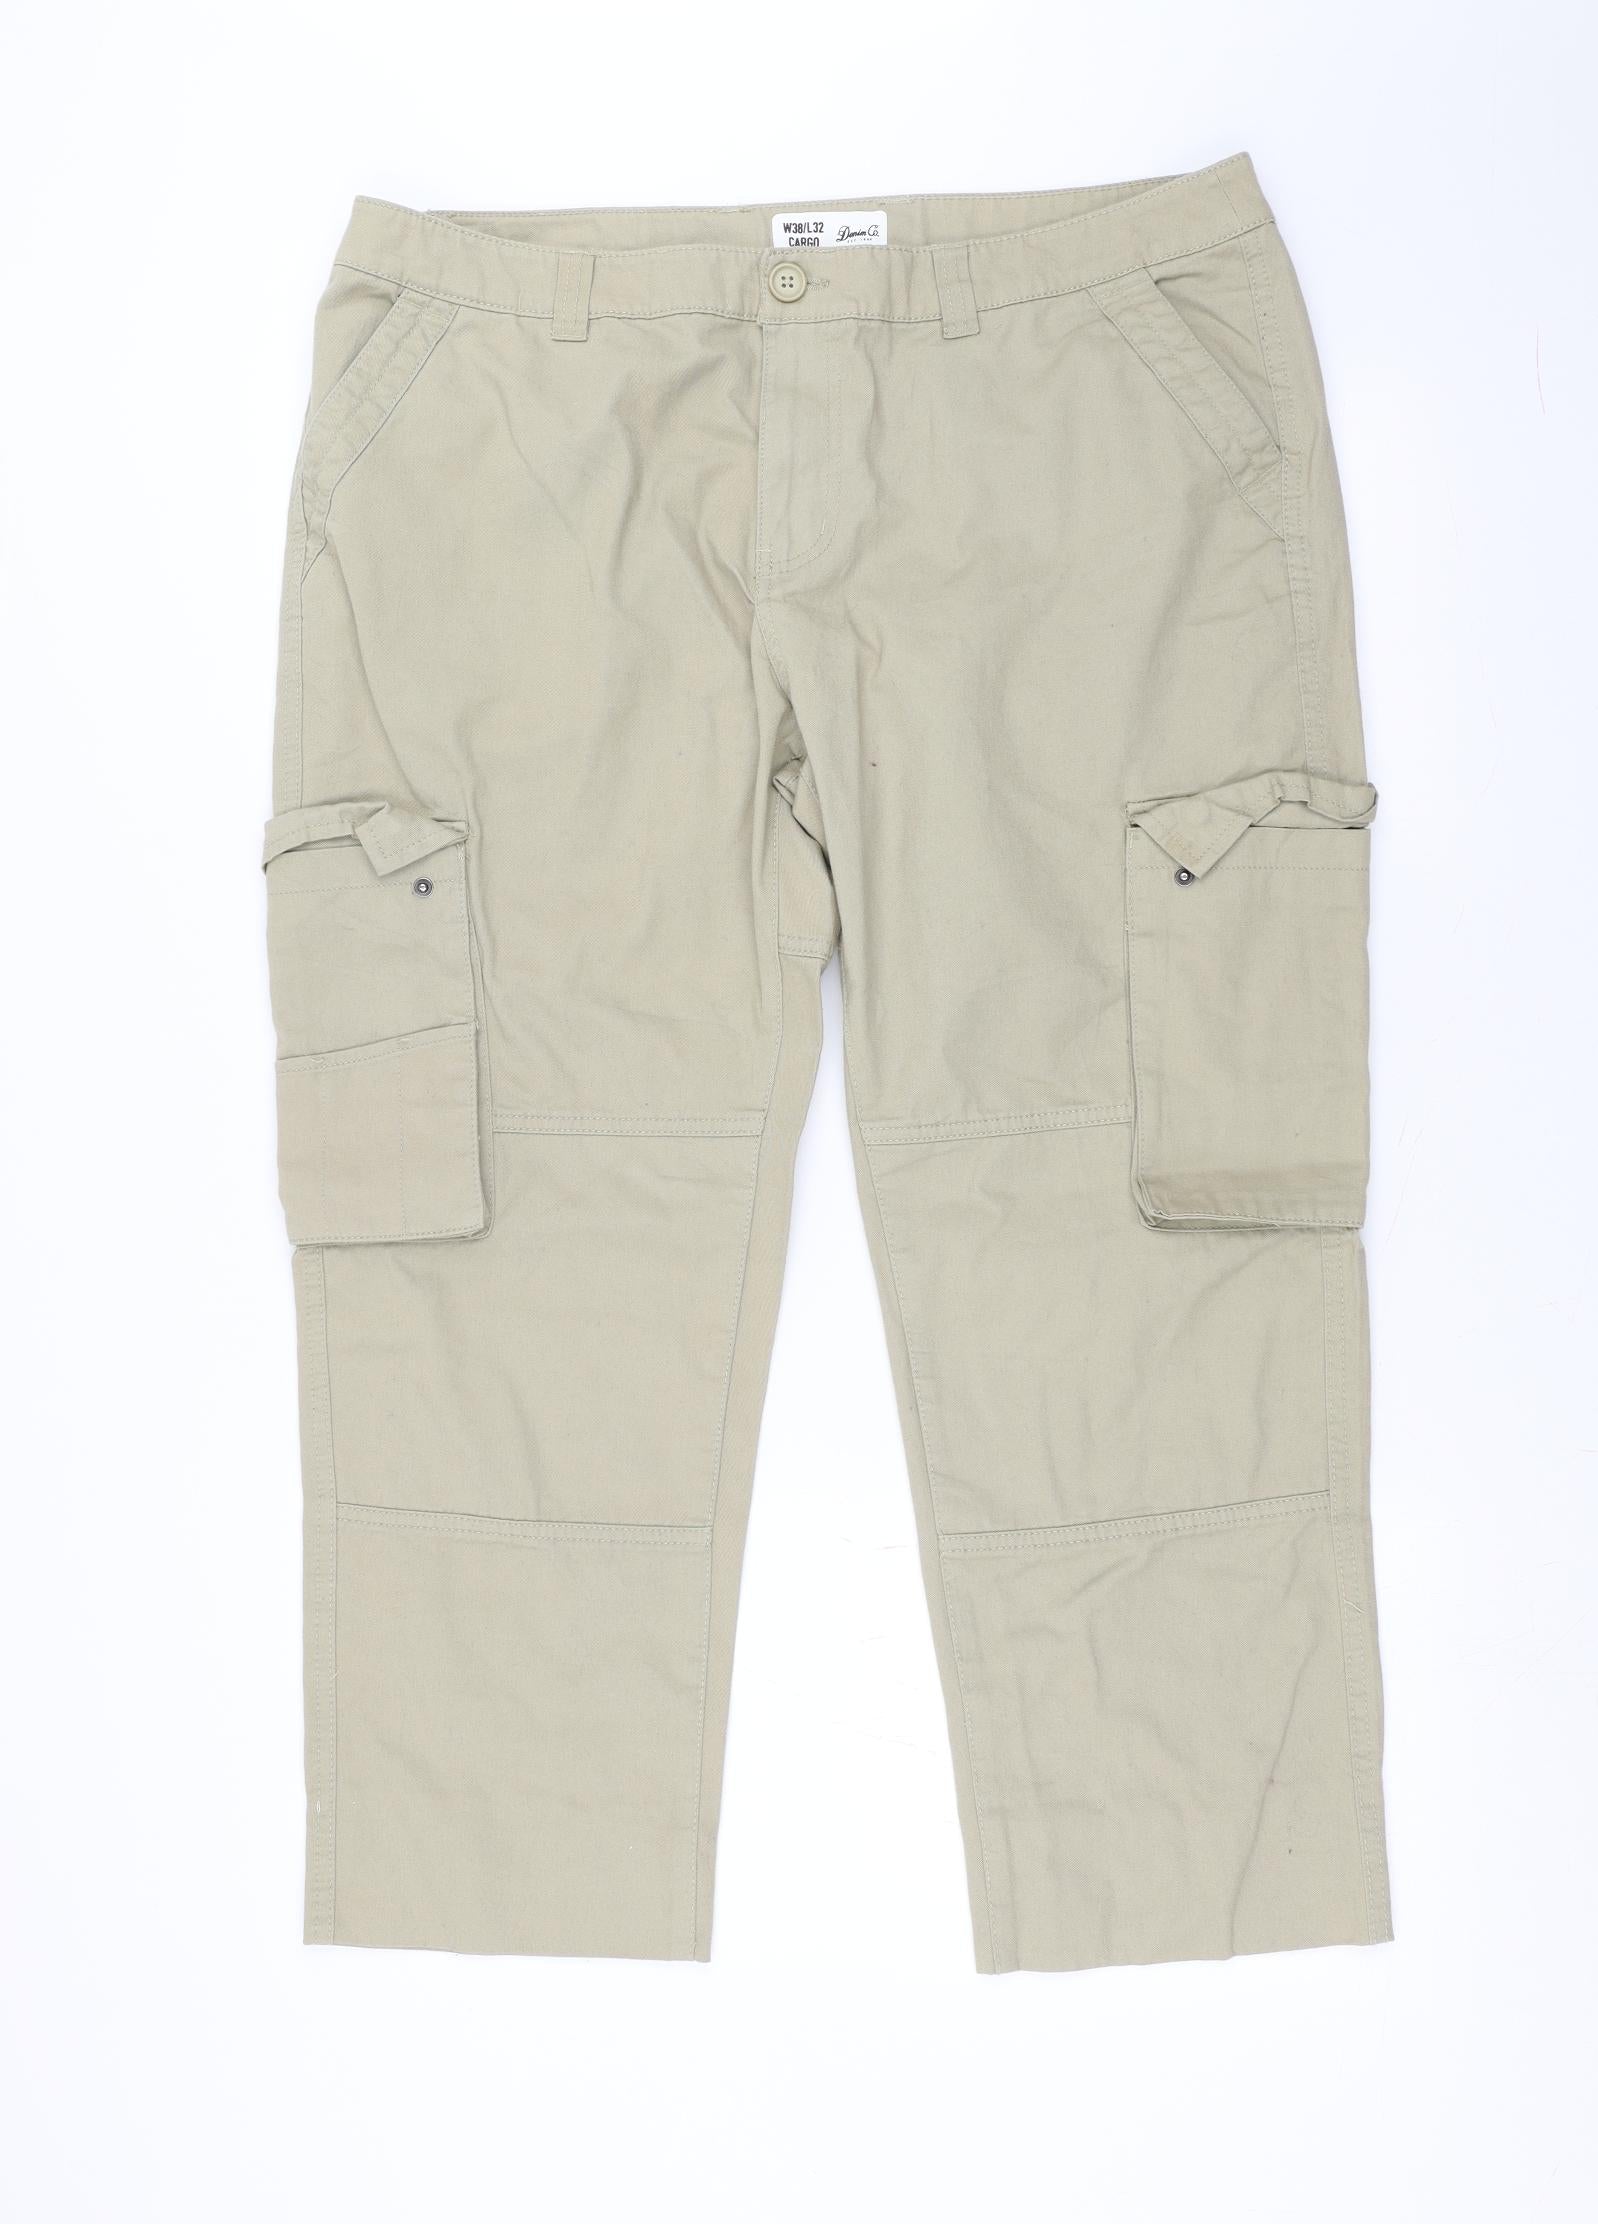 Harajuku Vintage Cargo Pants With Multi Pockets For Men Loose Fit, Wide  Leg, Streetwear, Hip Hop, And Mopping Cargo Trousers Primark Style #230316  From Kong04, $23.78 | DHgate.Com